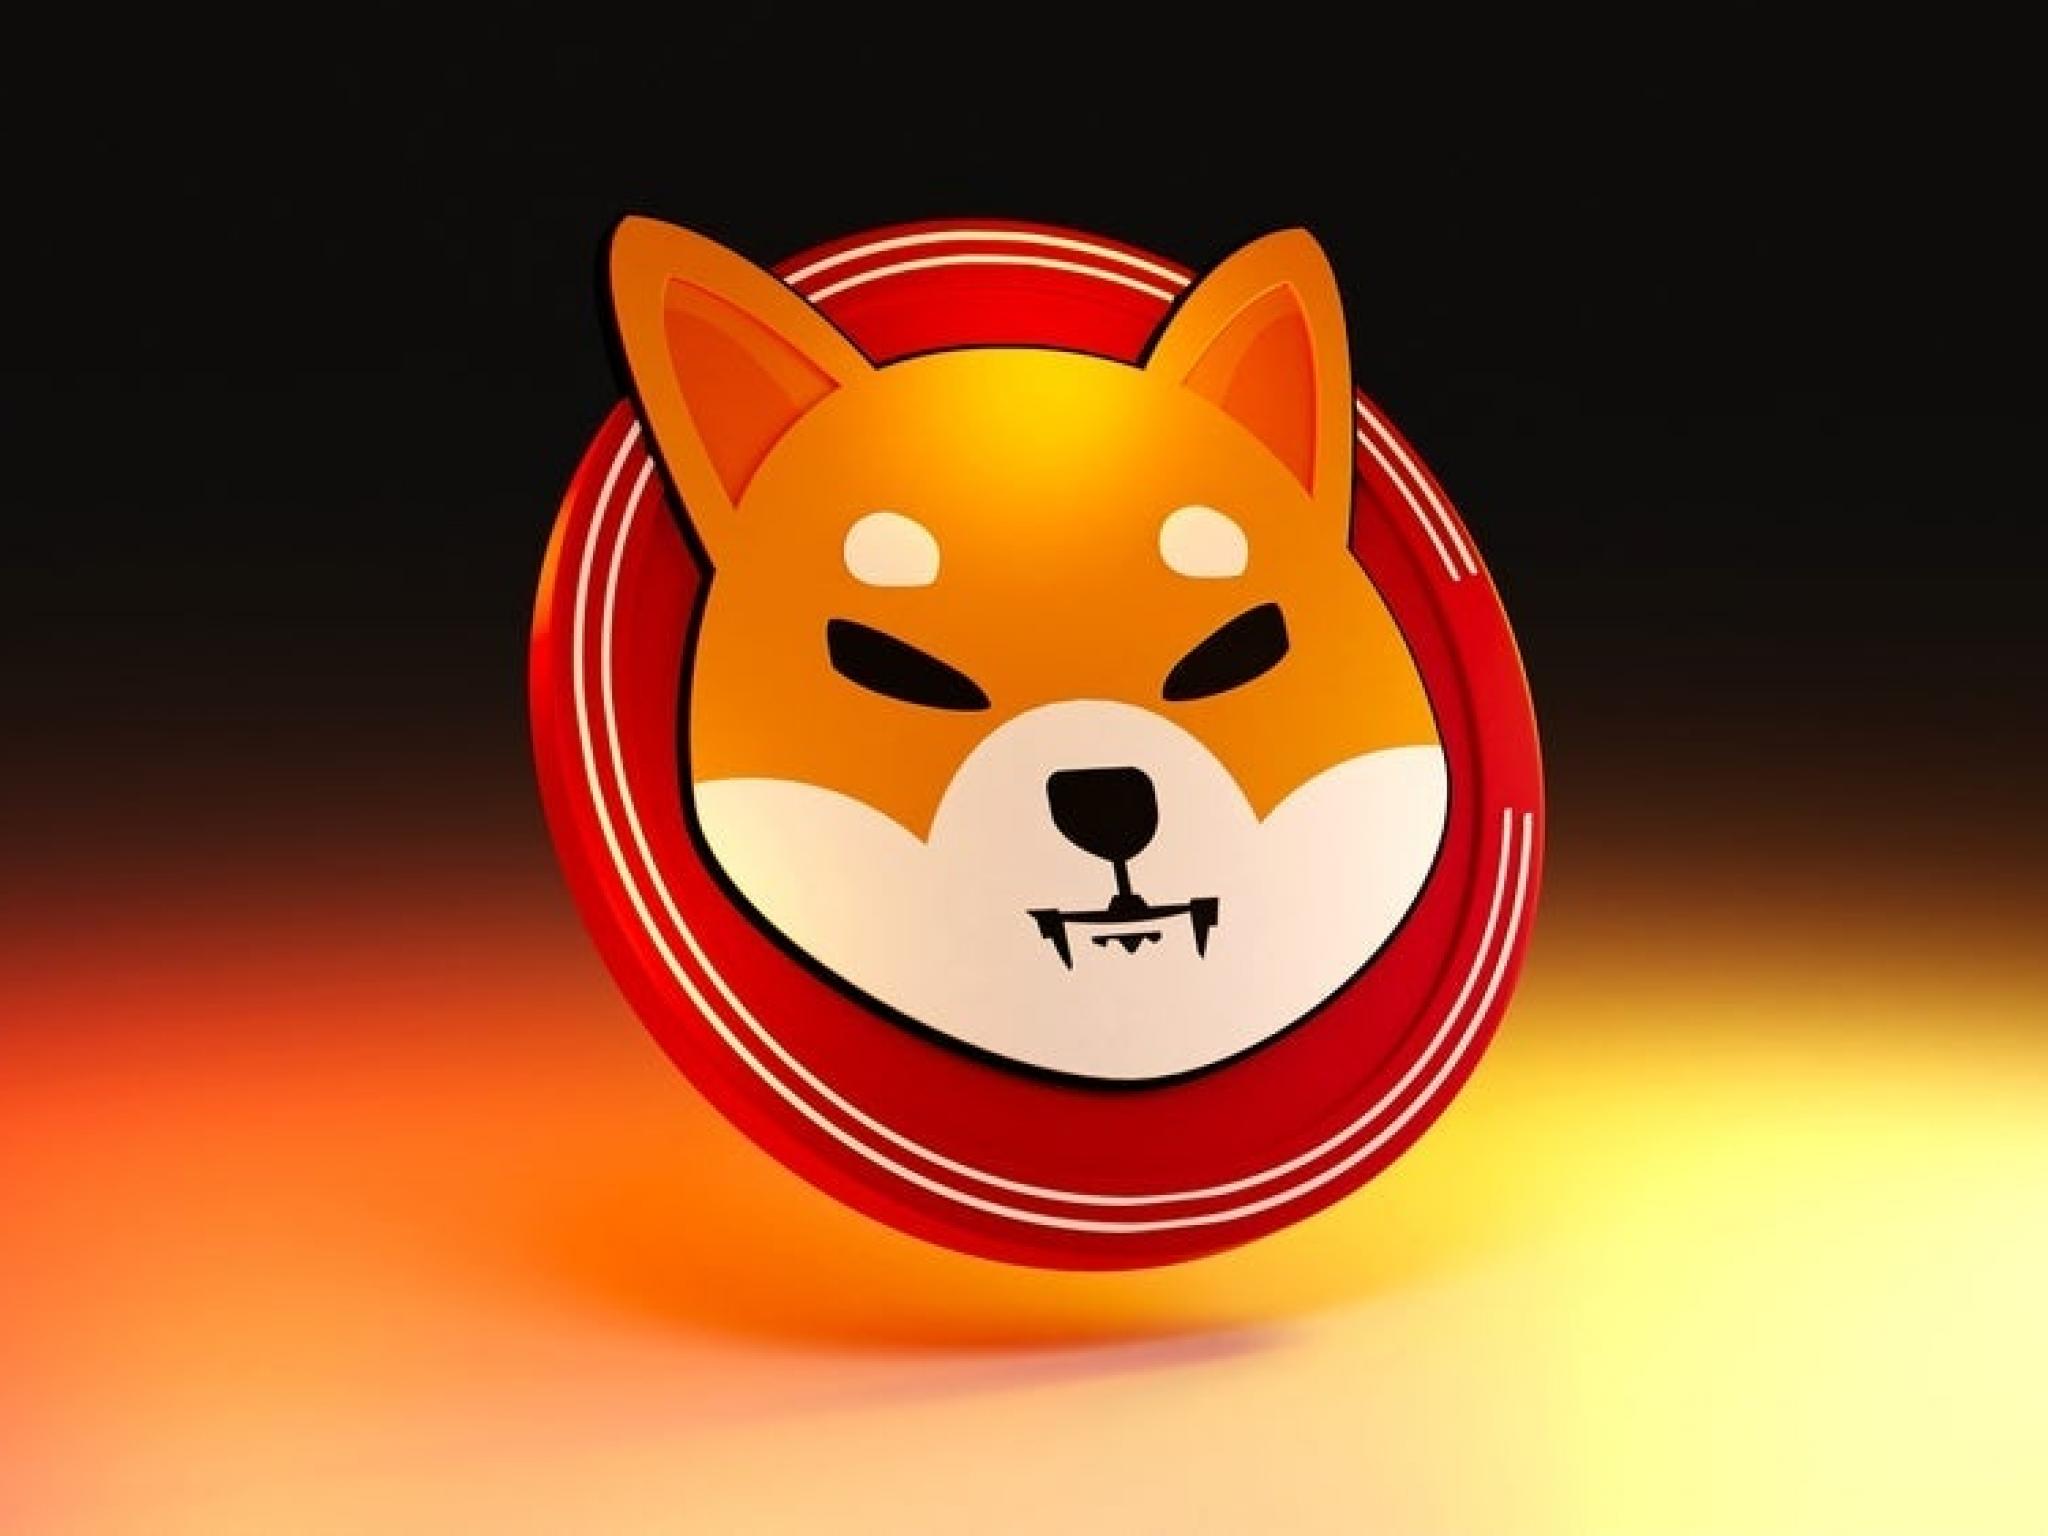  shiba-inu-investor-turns-2625-investment-in-dogecoin-killer-to-11m-afer-35-years-of-inactivity 